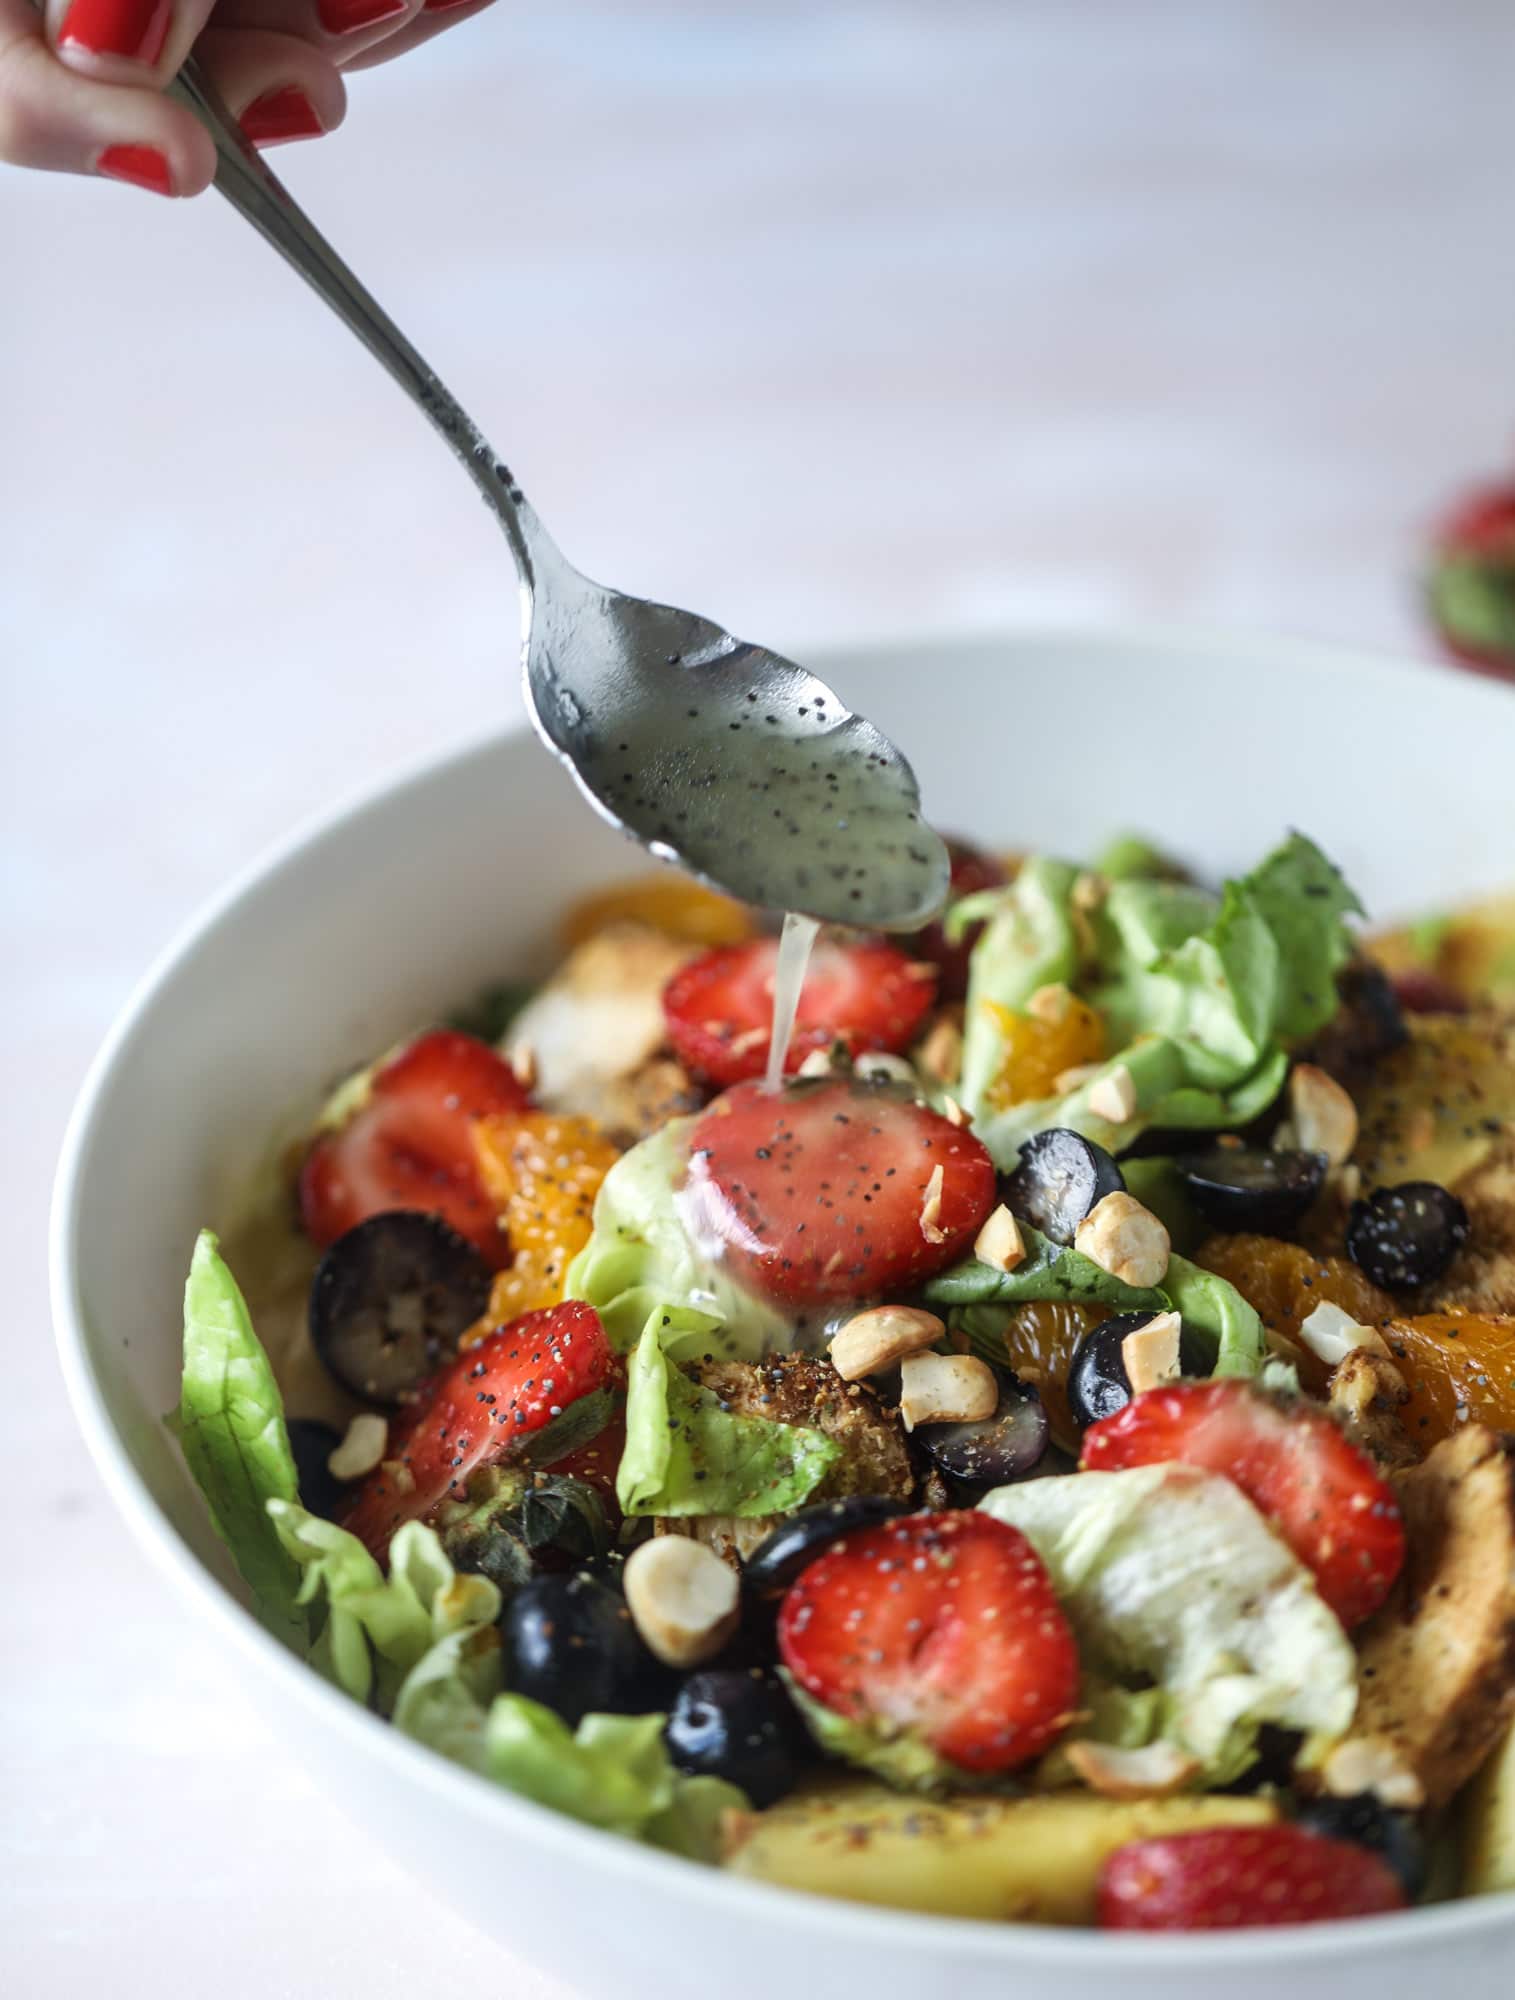 This copycat Panera strawberry poppyseed salad is absolutely delicious and refreshing and perfect for summer! Serve it with grilled chicken like the recipe here or swap for shrimp or fish. I howsweeteats.com #strawberry #poppyseed #salad #chicken #panera #copycat